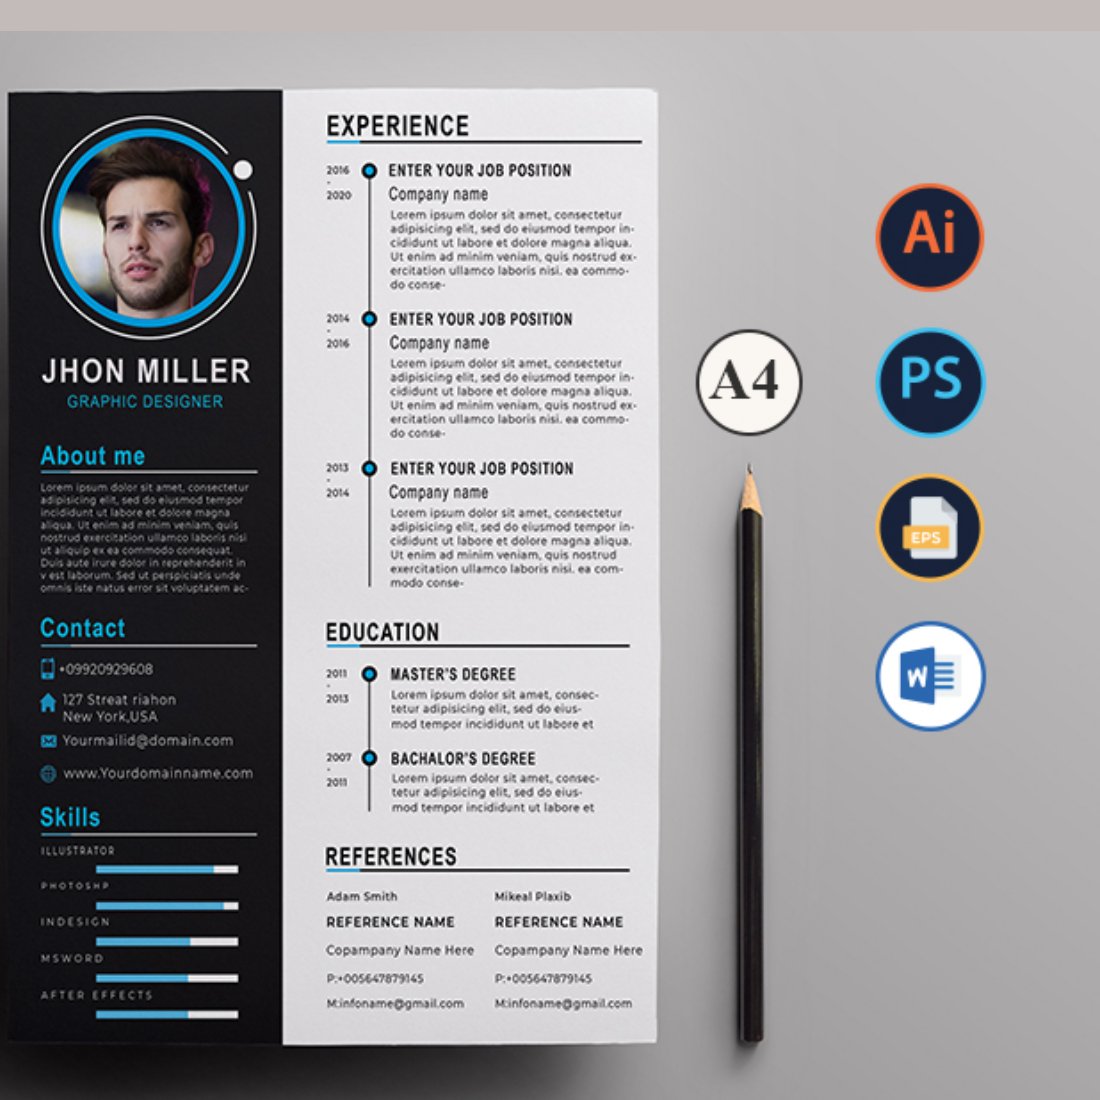 Professional resume template with icons and icons.